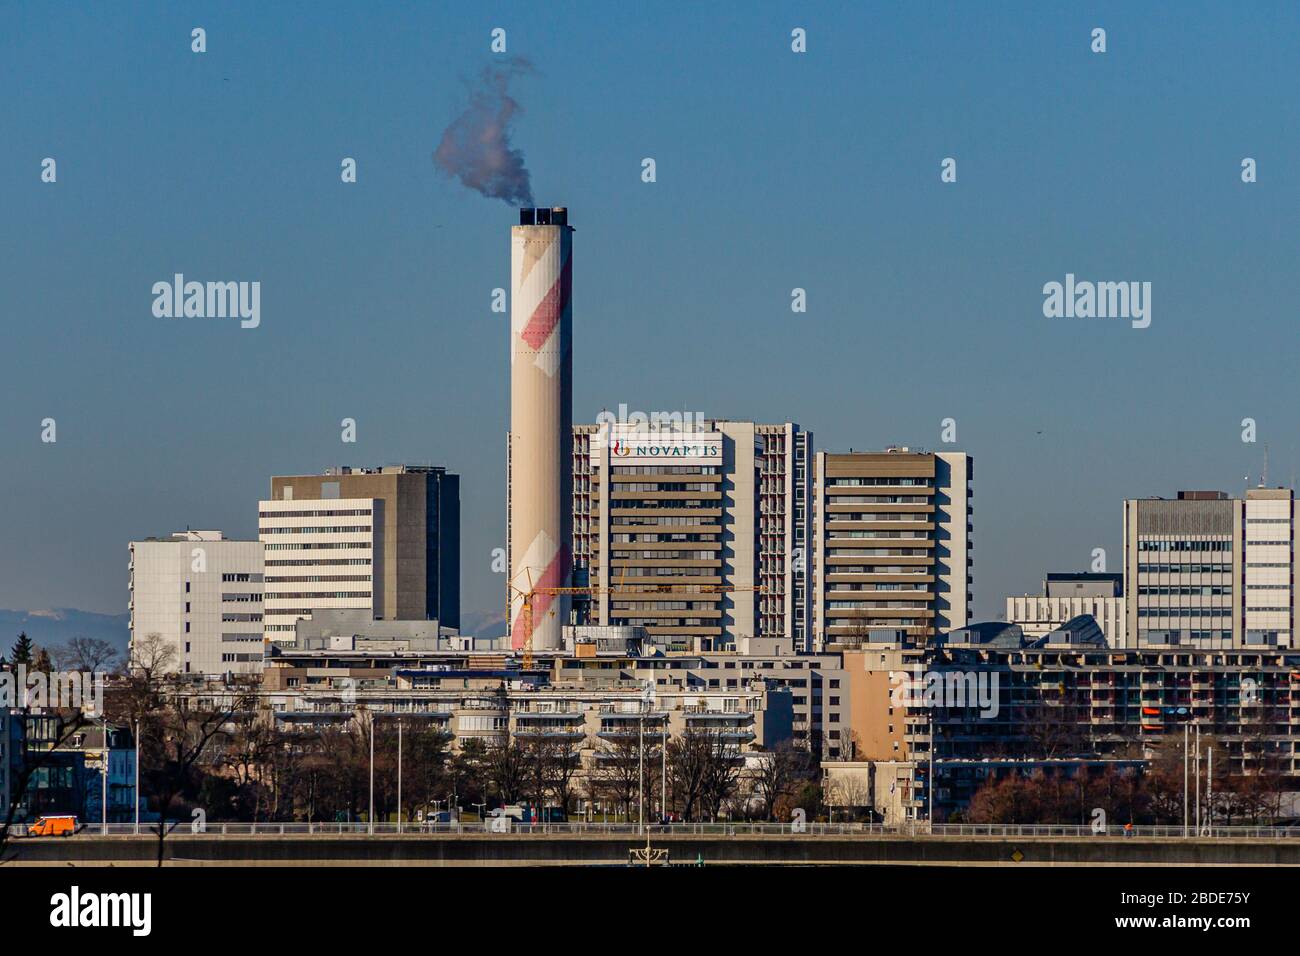 The Novartis pharmaceutical company headquarters and campus in Basel, Switzerland. February 2020. Stock Photo